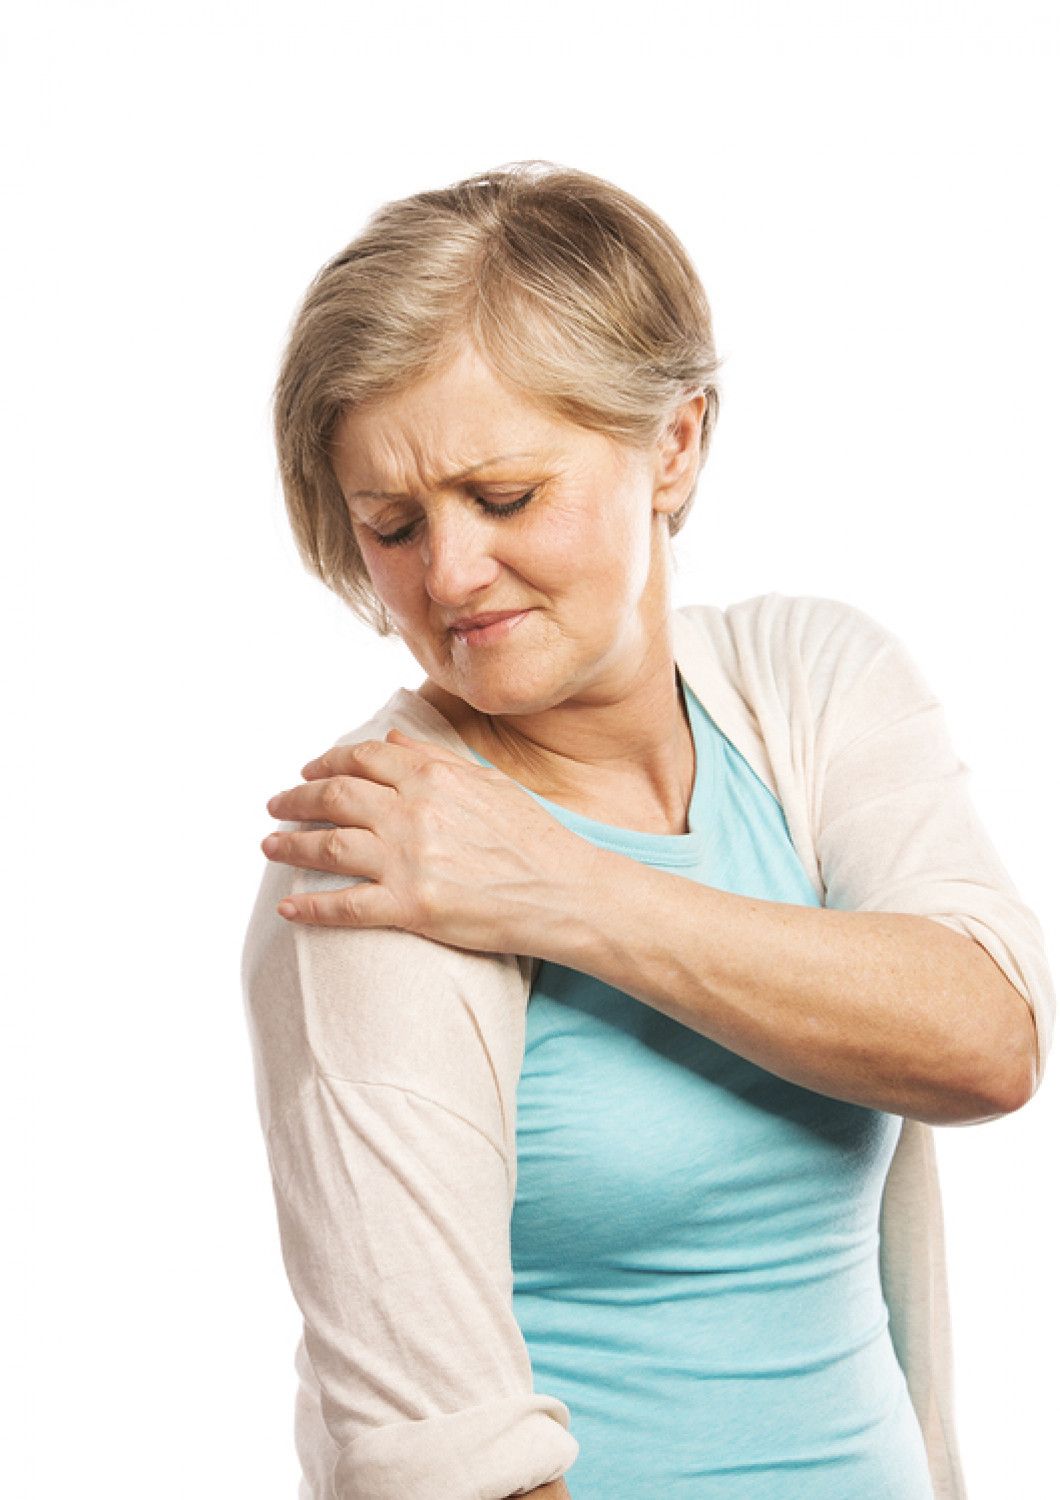 A Woman Suffering from a Shoulder Pain